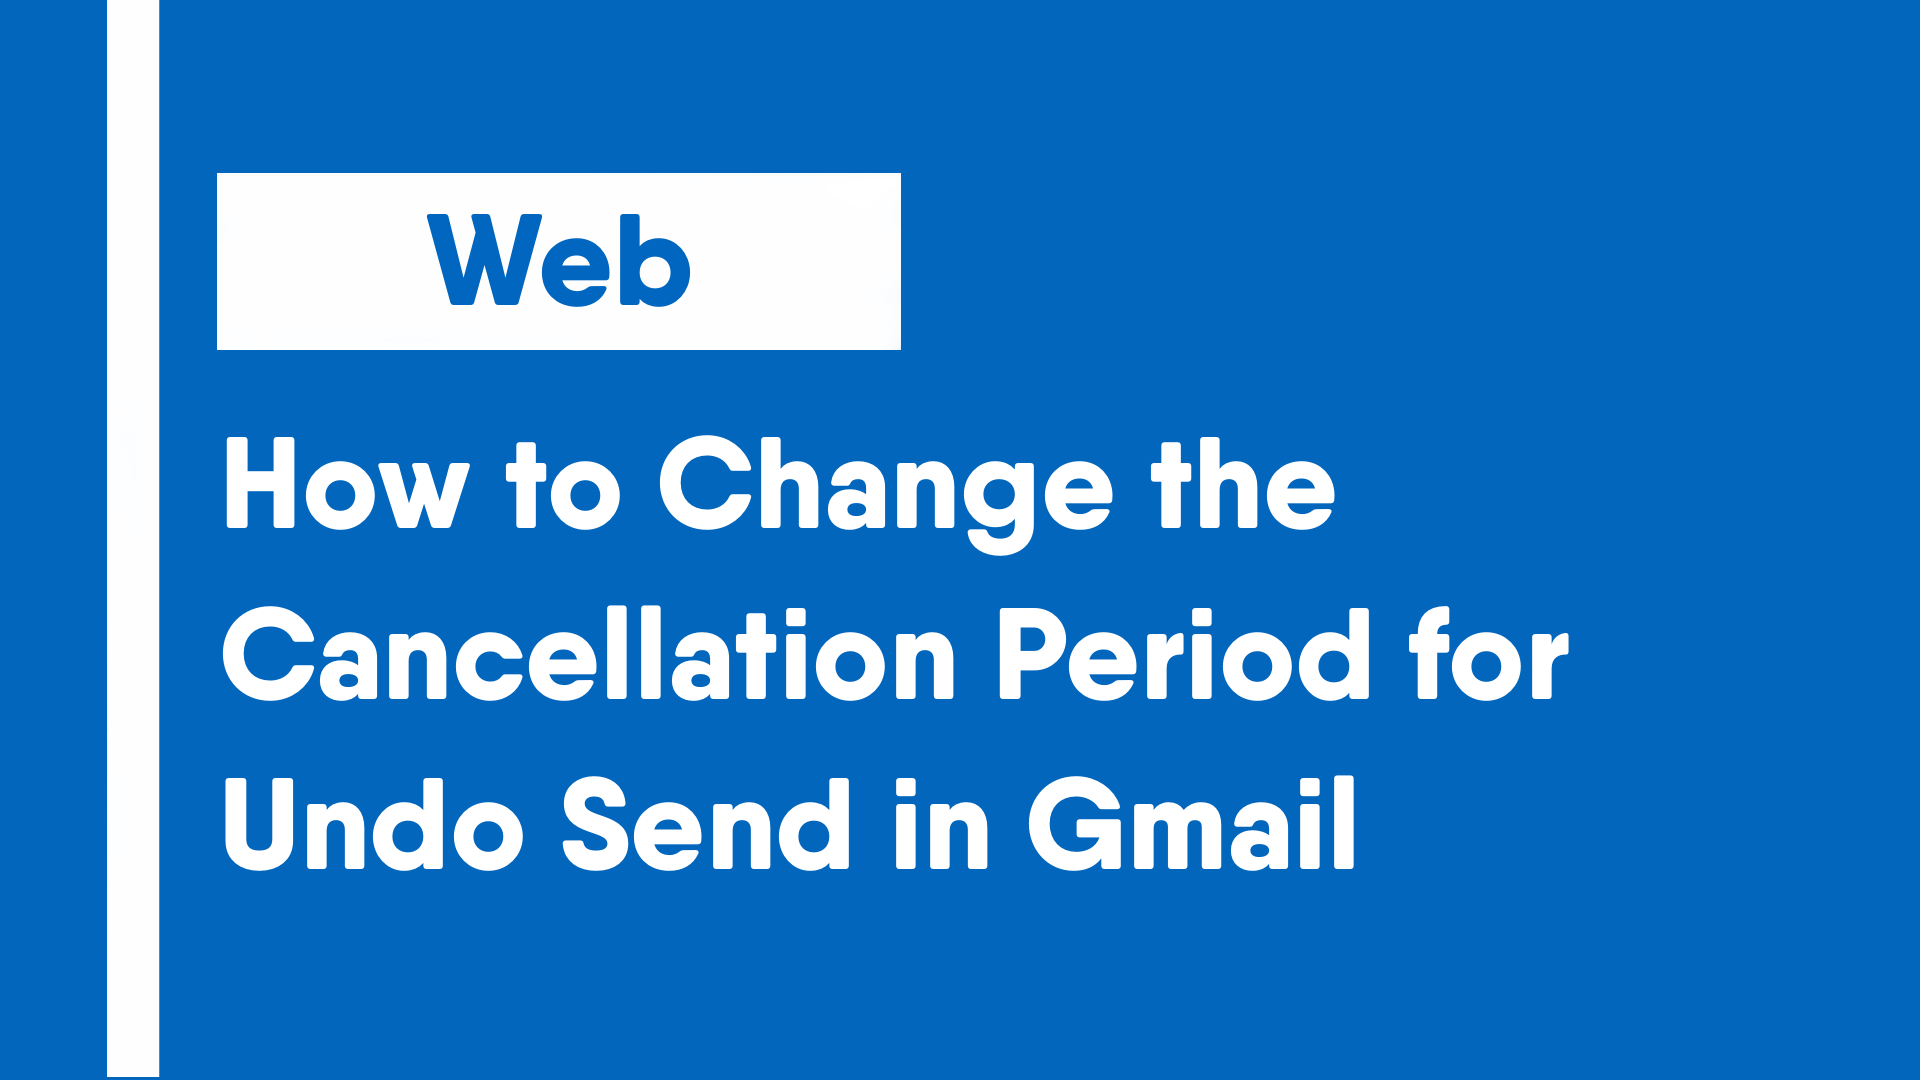 How to Change the Cancellation Period for Undo Send in Gmail